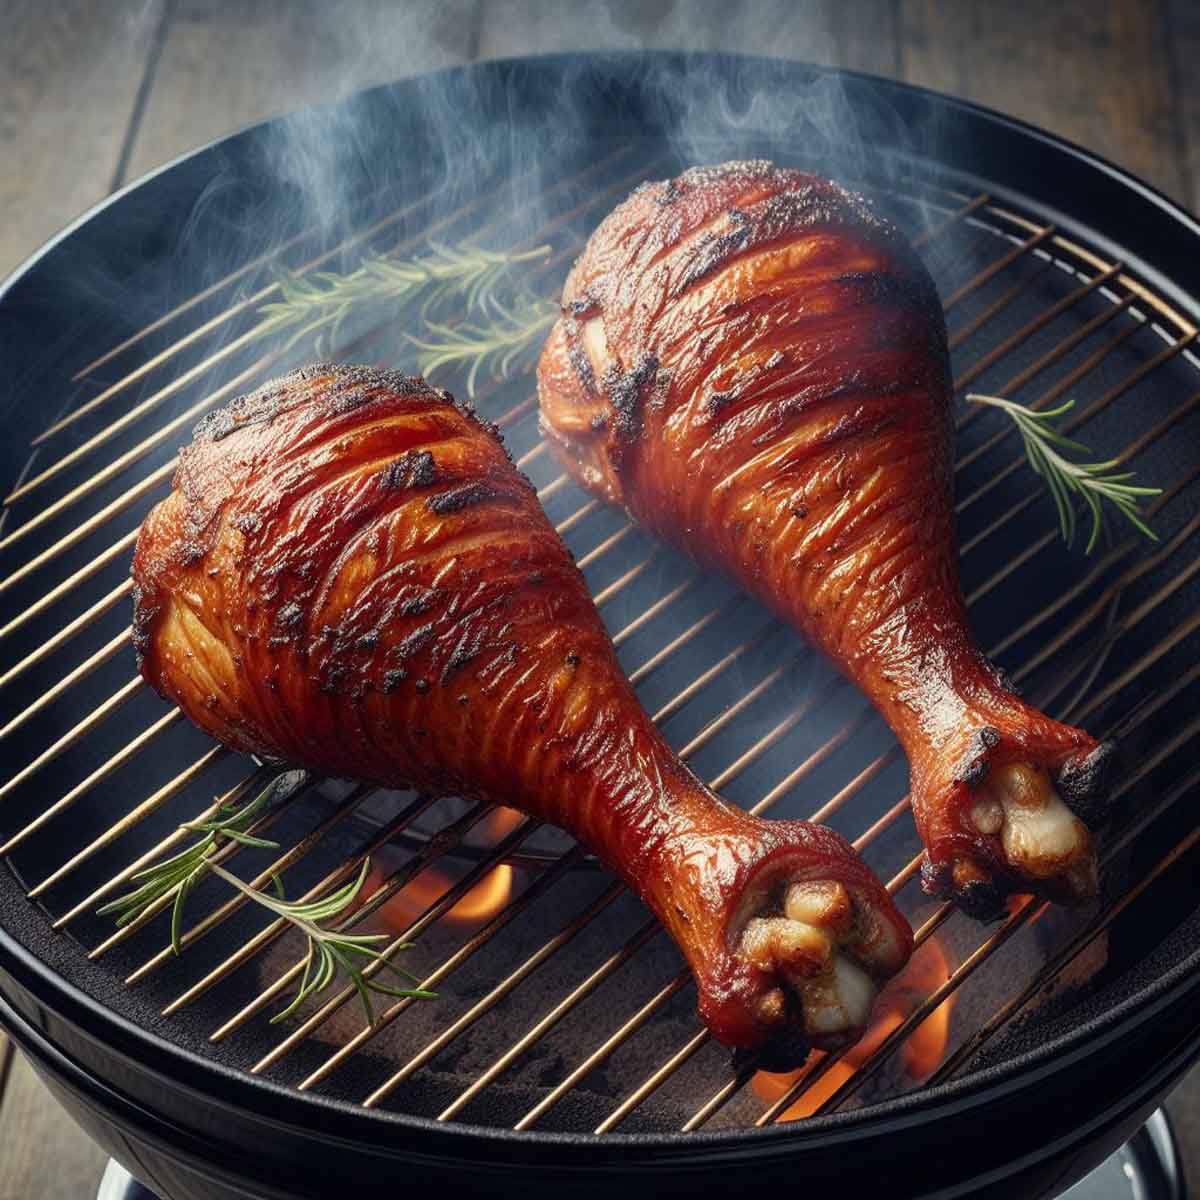 Smoked turkey legs on a grill, slowly reheating, showing evenly cooked, juicy meat with a deep color.